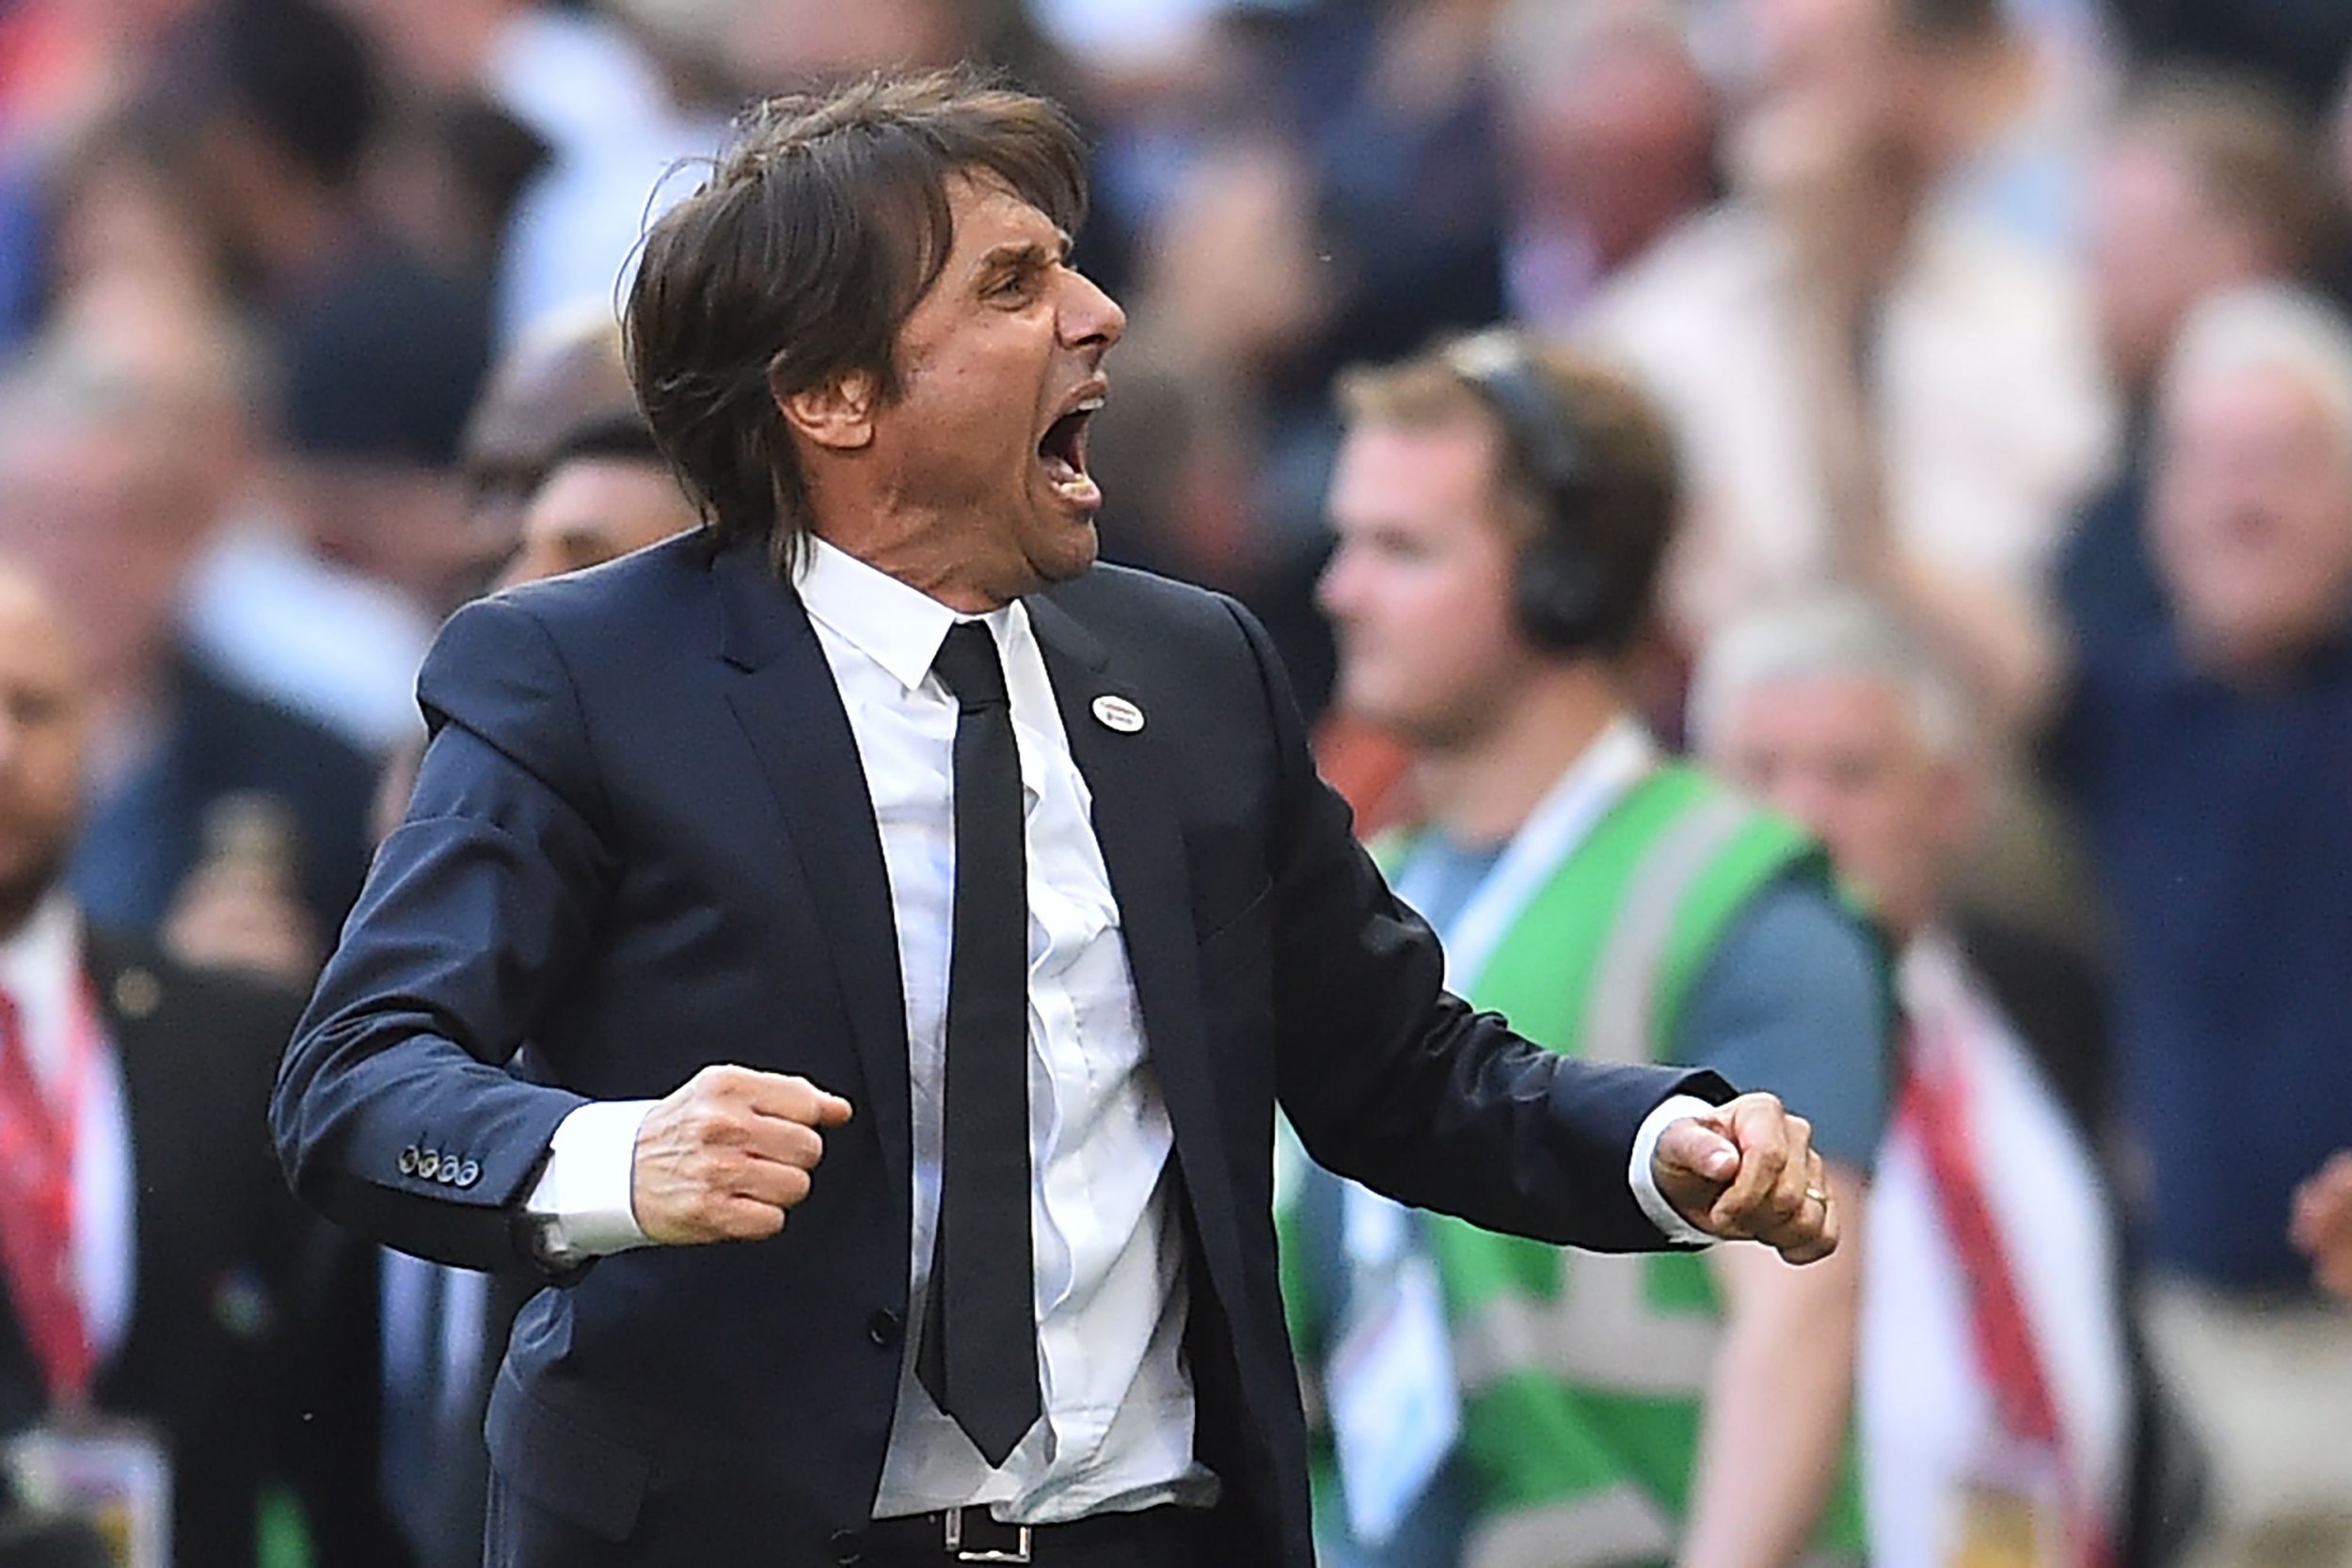 Chelsea consider keeping Antonio Conte as manager after Real Madrid job failed